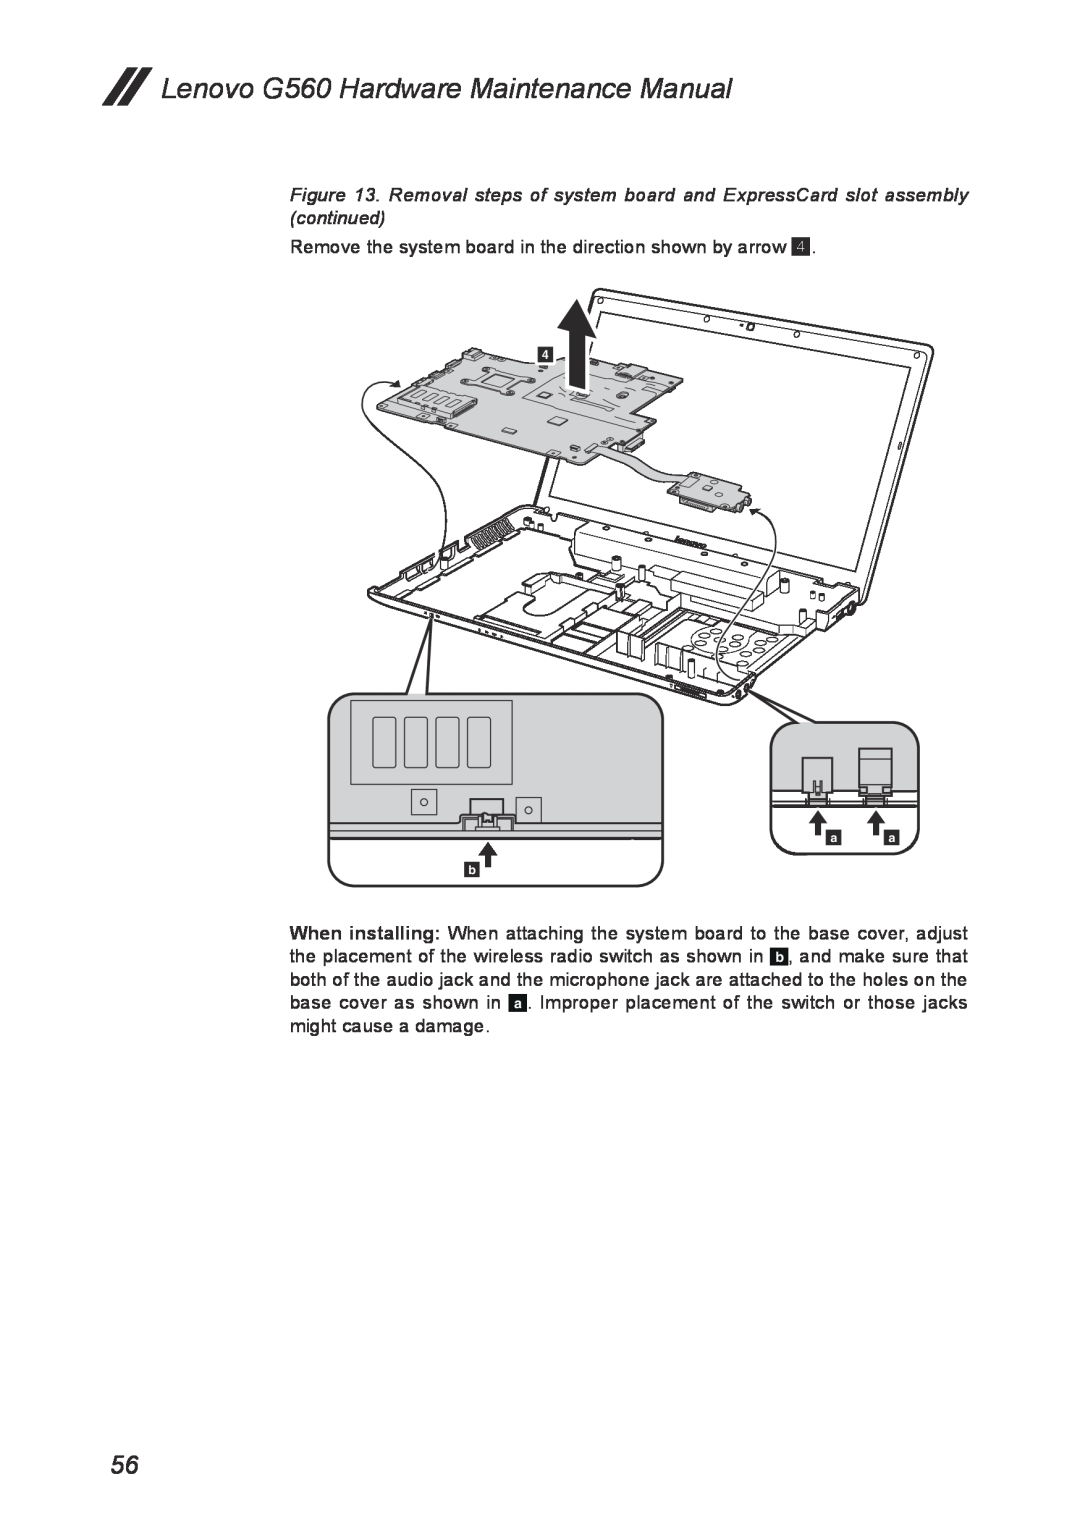 Lenovo manual Lenovo G560 Hardware Maintenance Manual, Remove the system board in the direction shown by arrow 